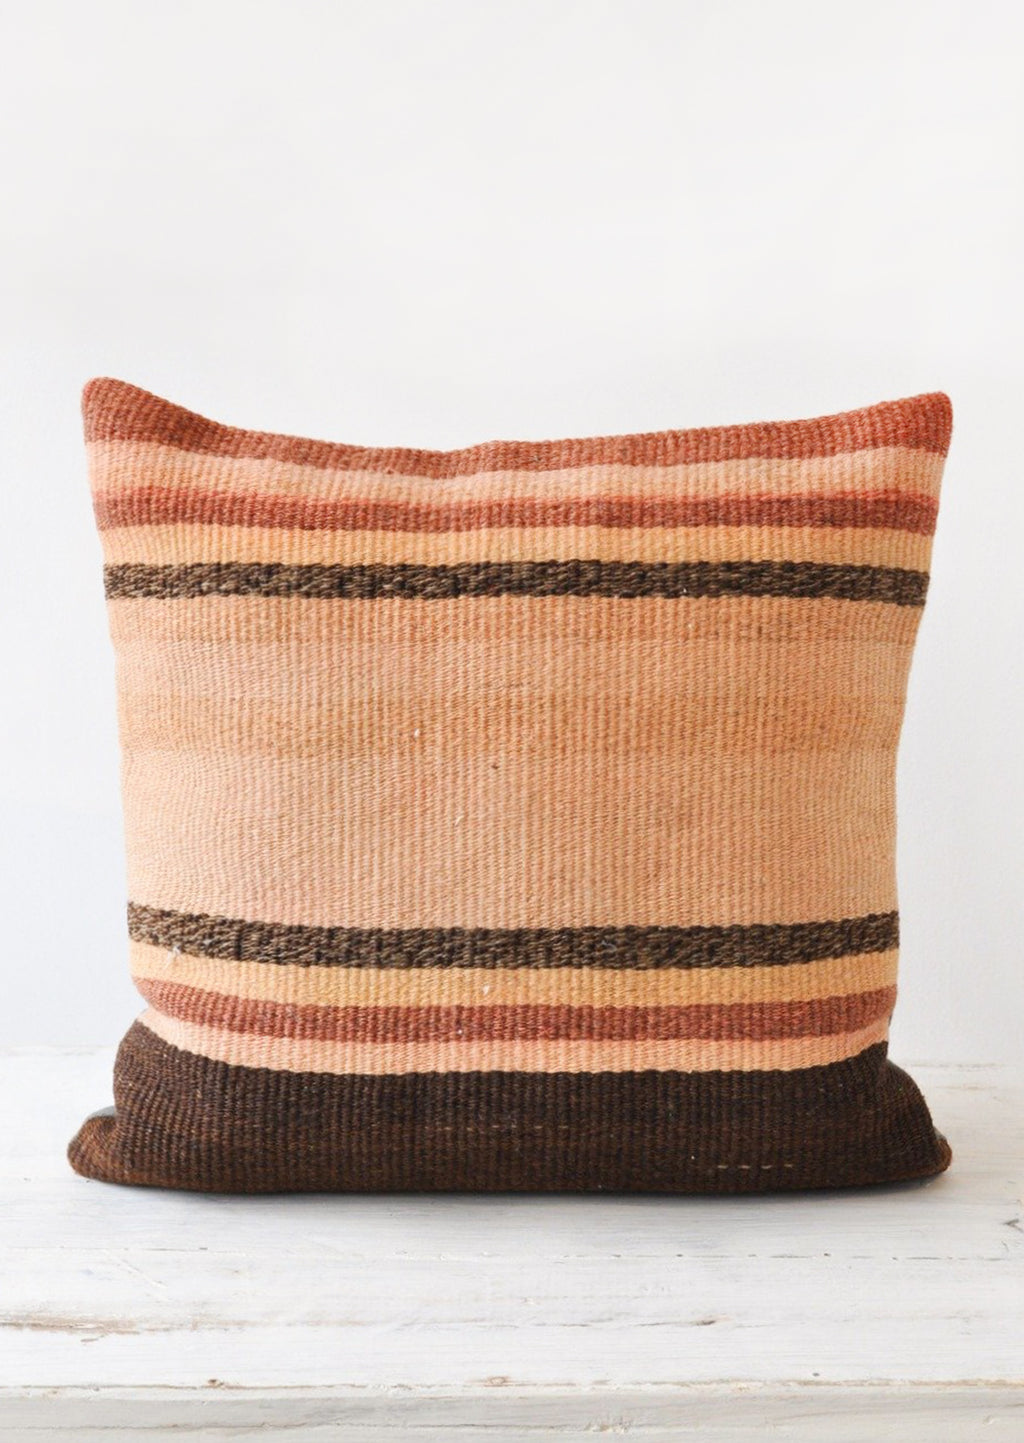 1: A striped kilim pillow in rust, adobe, and brown.